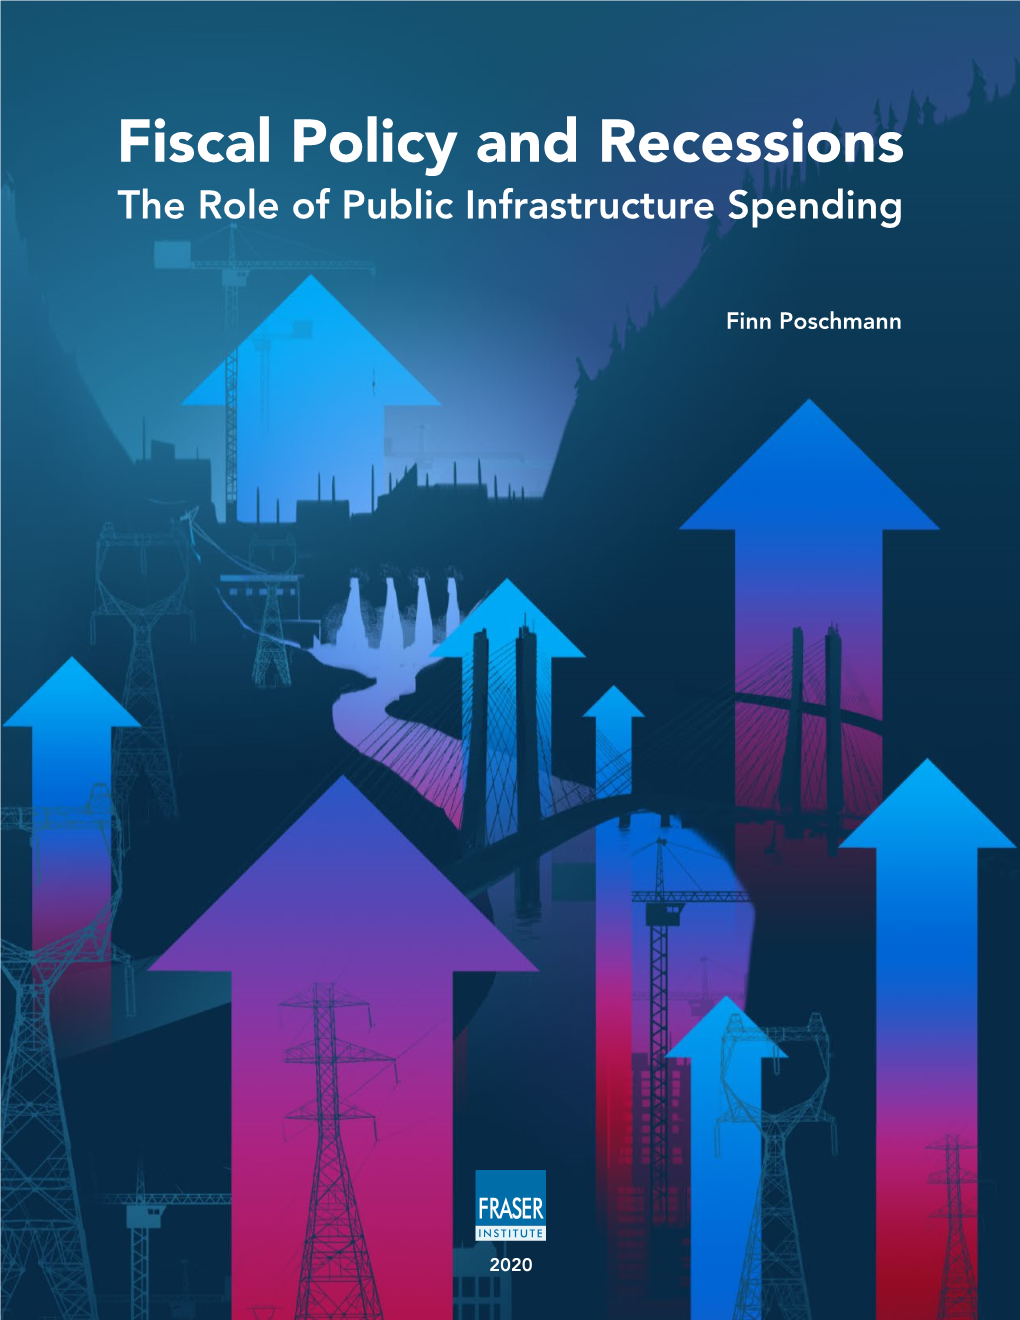 Fiscal Policy and Recessions: the Role of Public Infrastructure Spending